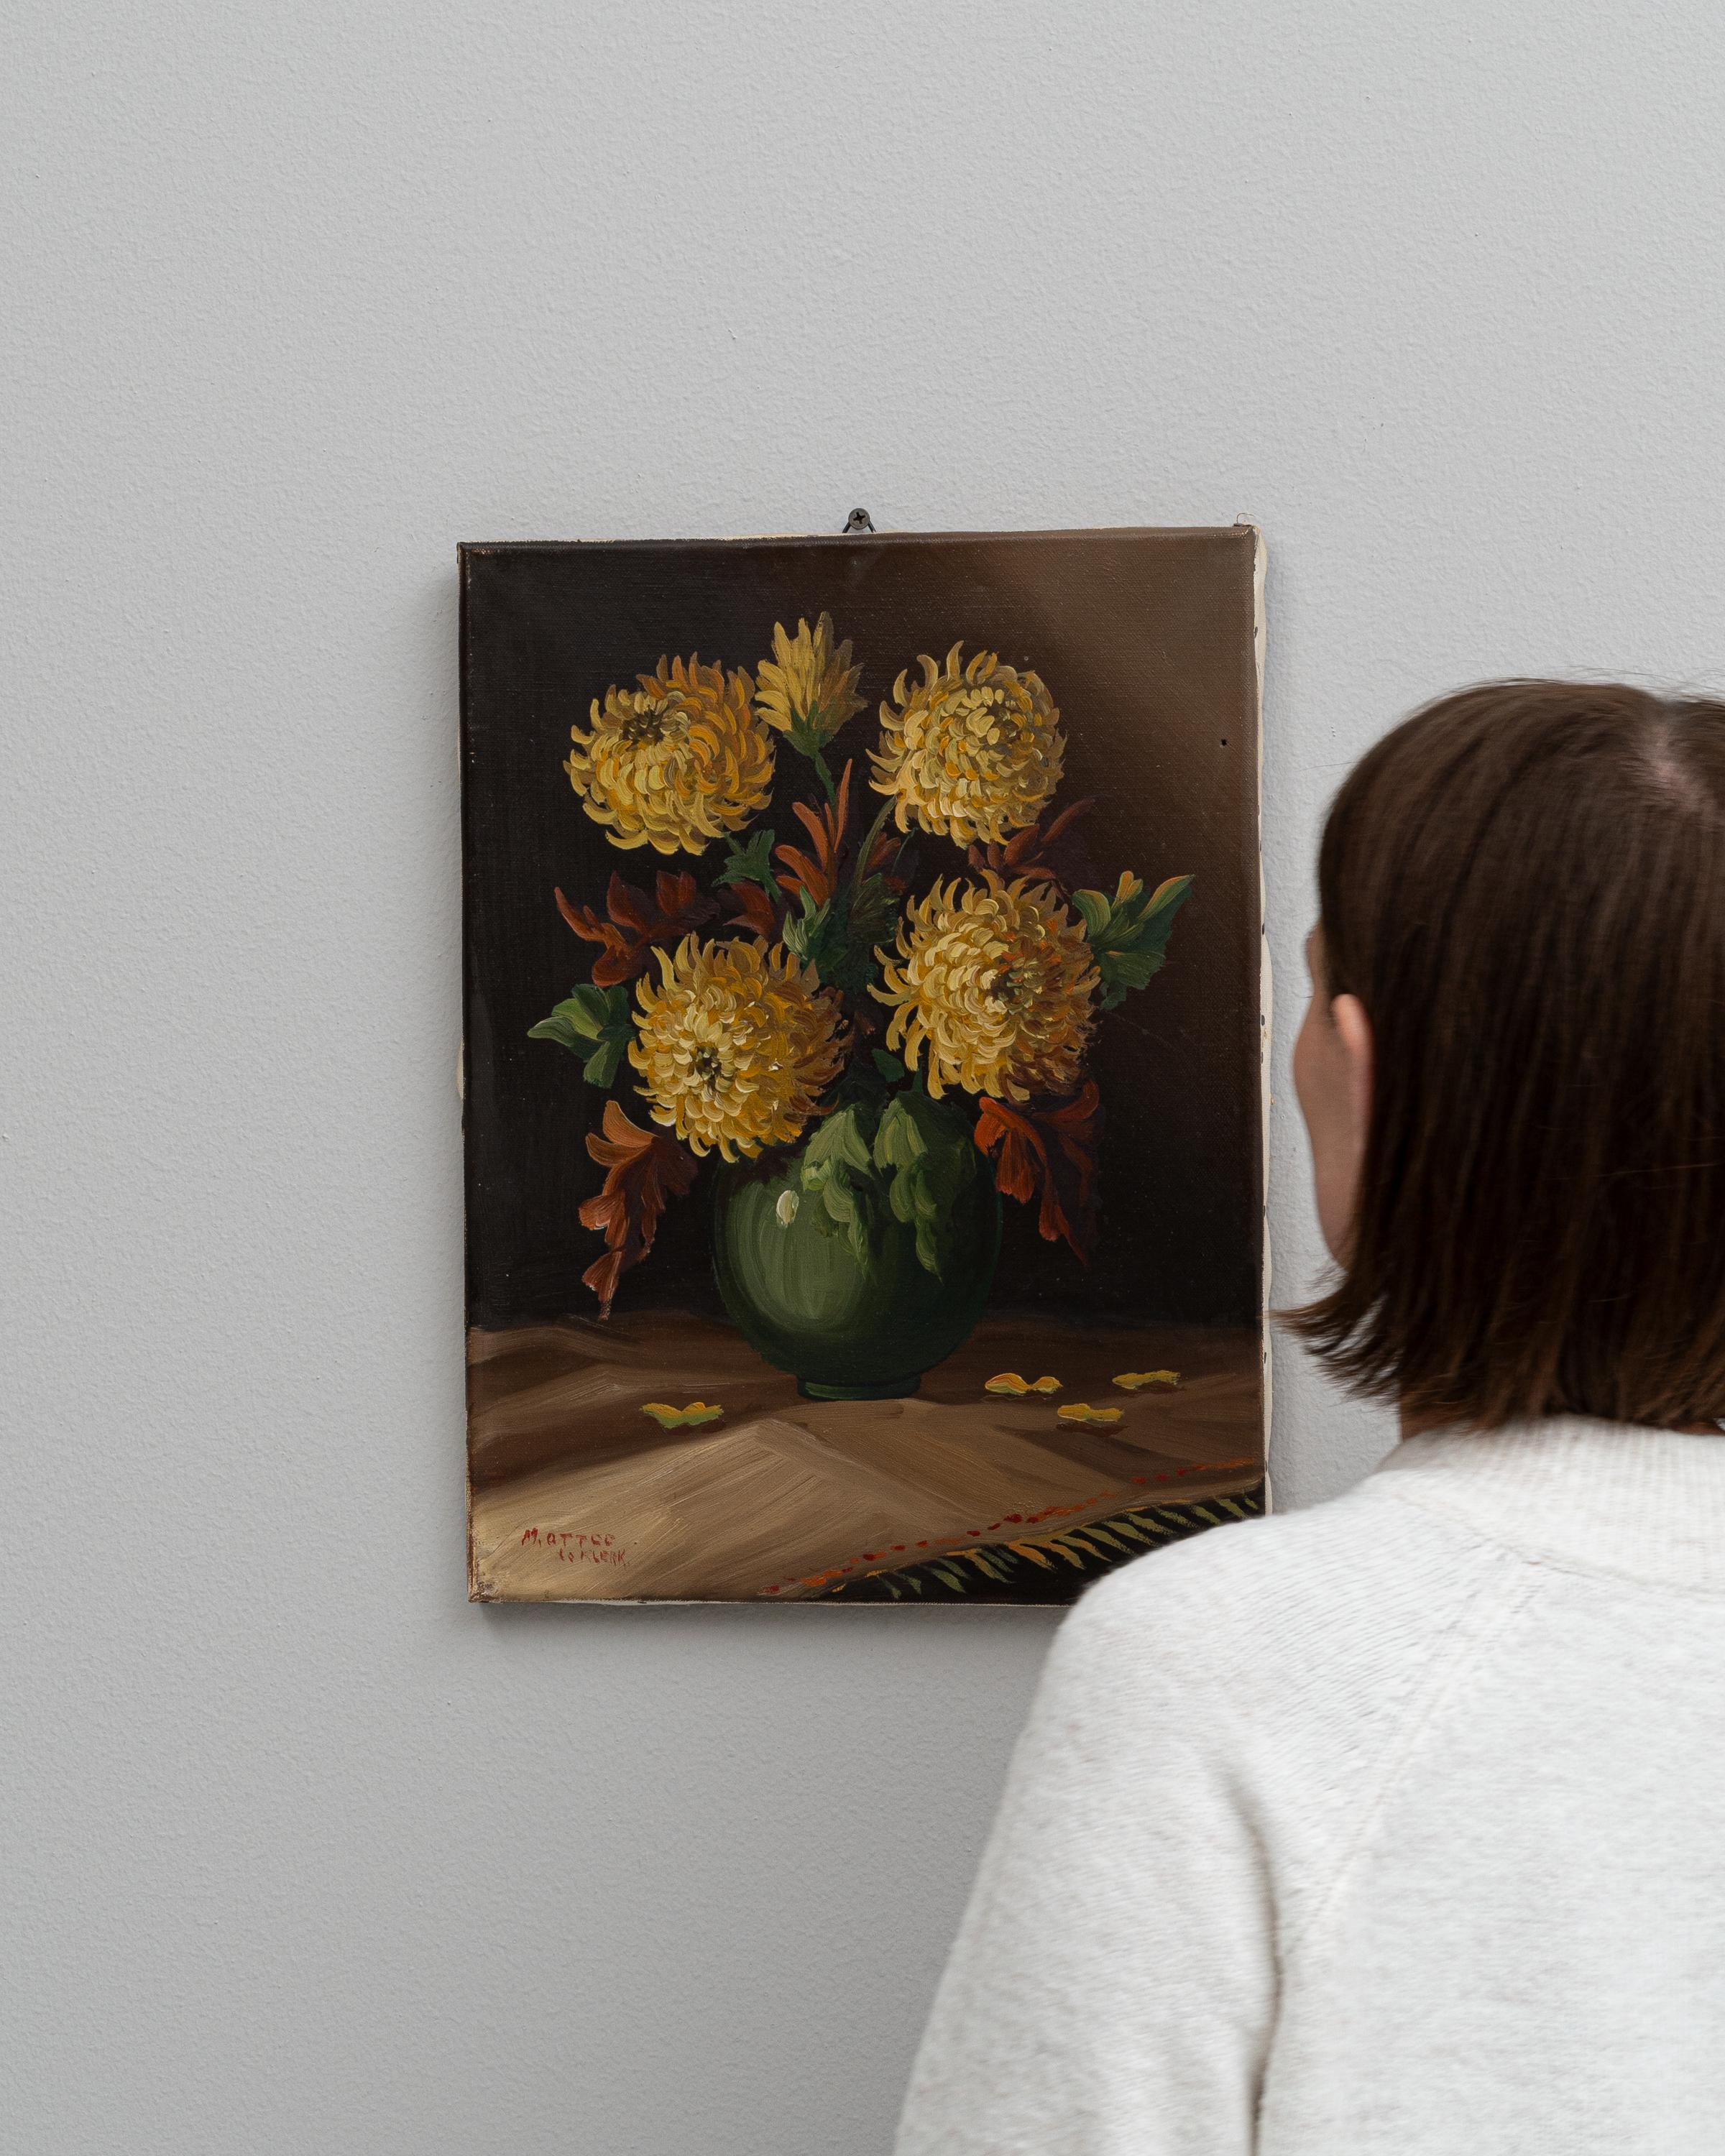 This exquisite 20th-century Belgian painting captures the timeless elegance of a floral arrangement in full bloom. Presented in a classic green vase, the vibrant yellow chrysanthemums burst with life against a deep, moody background, highlighting